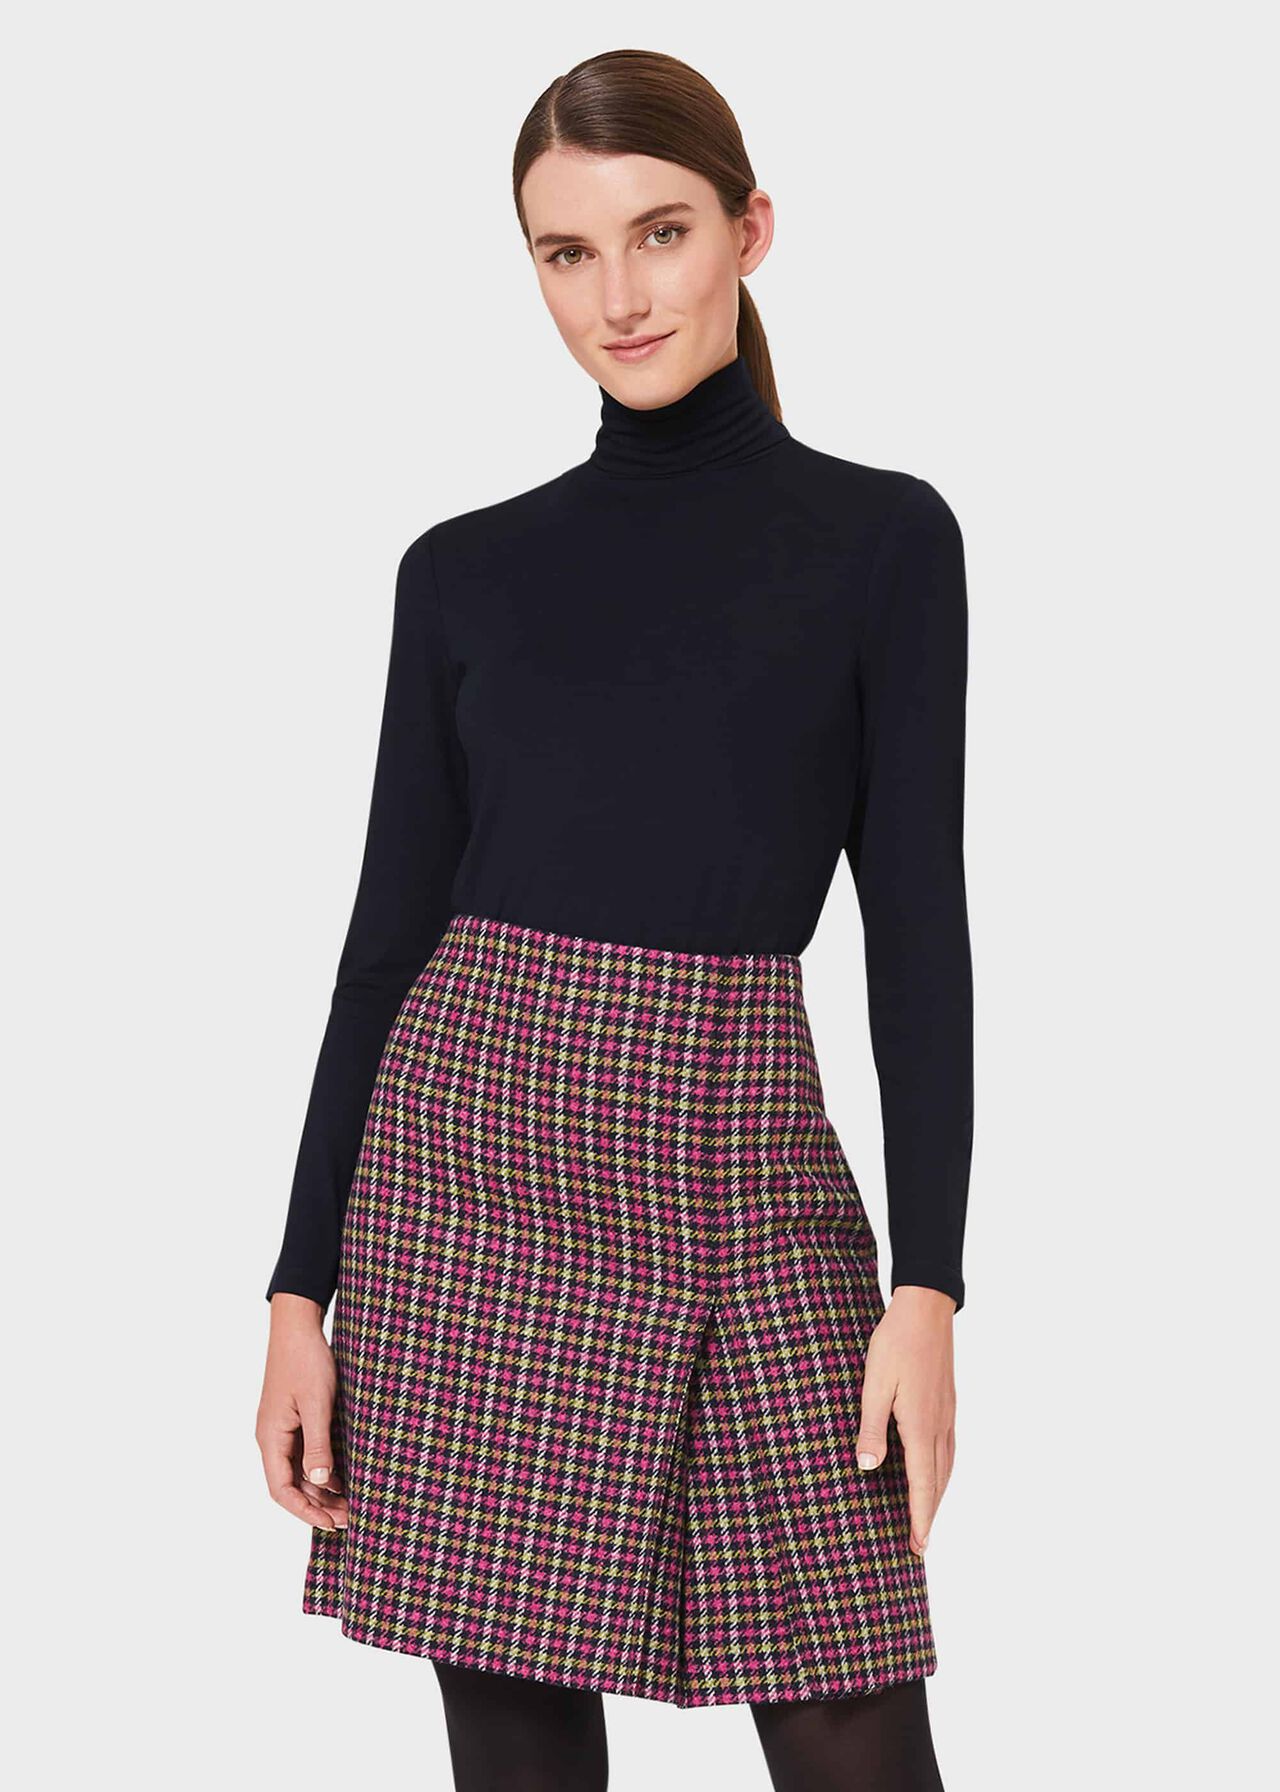 Avery Wool Check Pleated Skirt, Pink Lime Green, hi-res